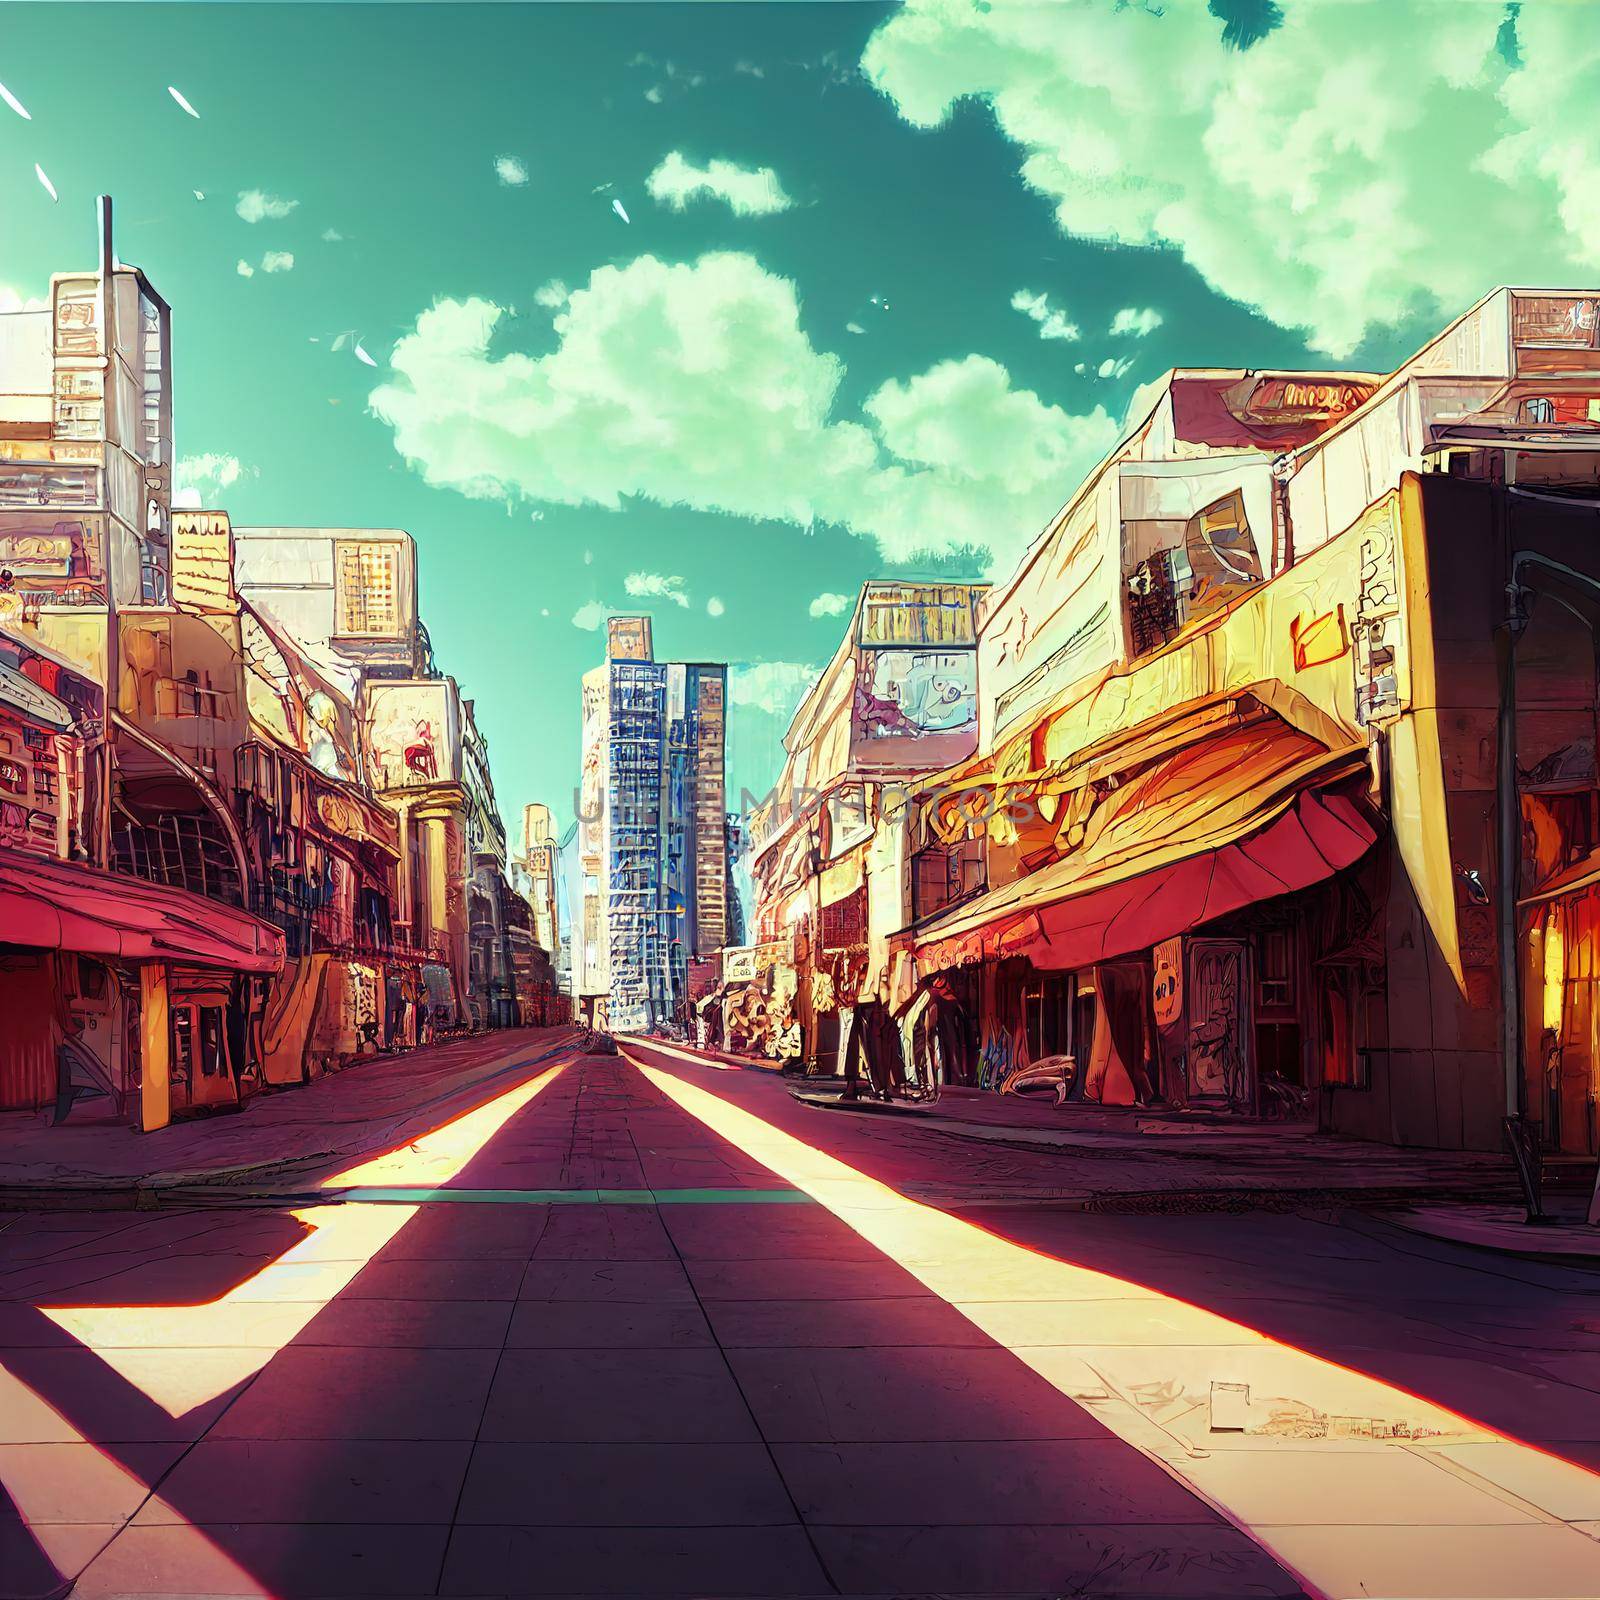 anime style city street with a lot of shops by 2ragon